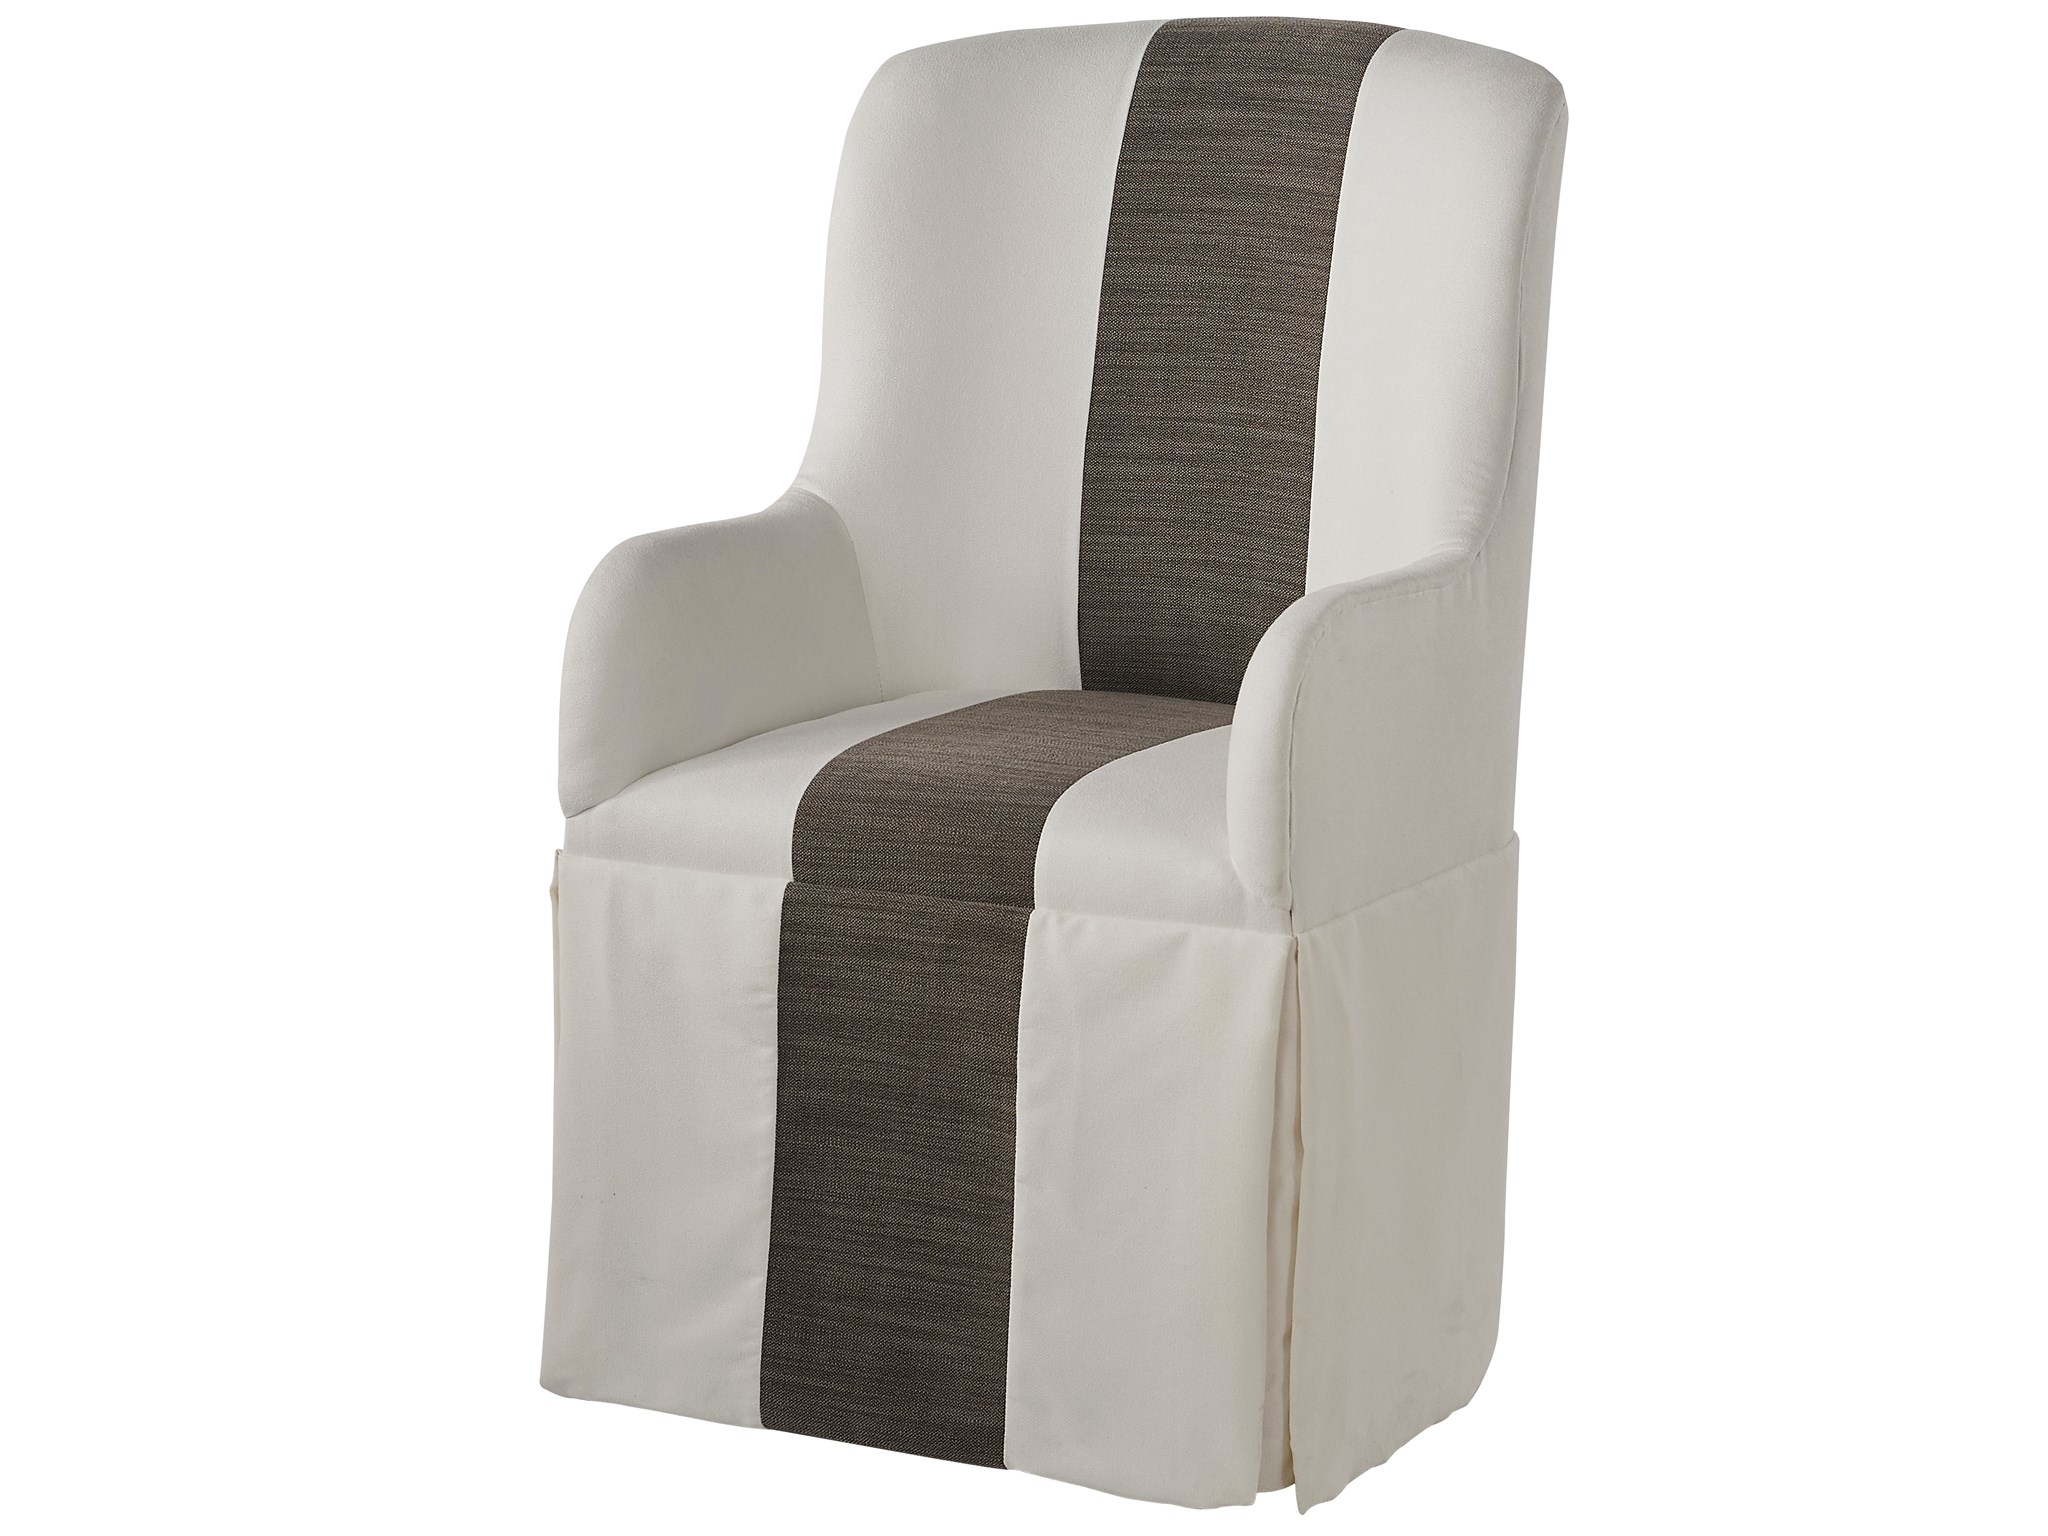 Modern Slip Cover Caster Arm Chair, Dining Room Chair With Arms Slipcovers